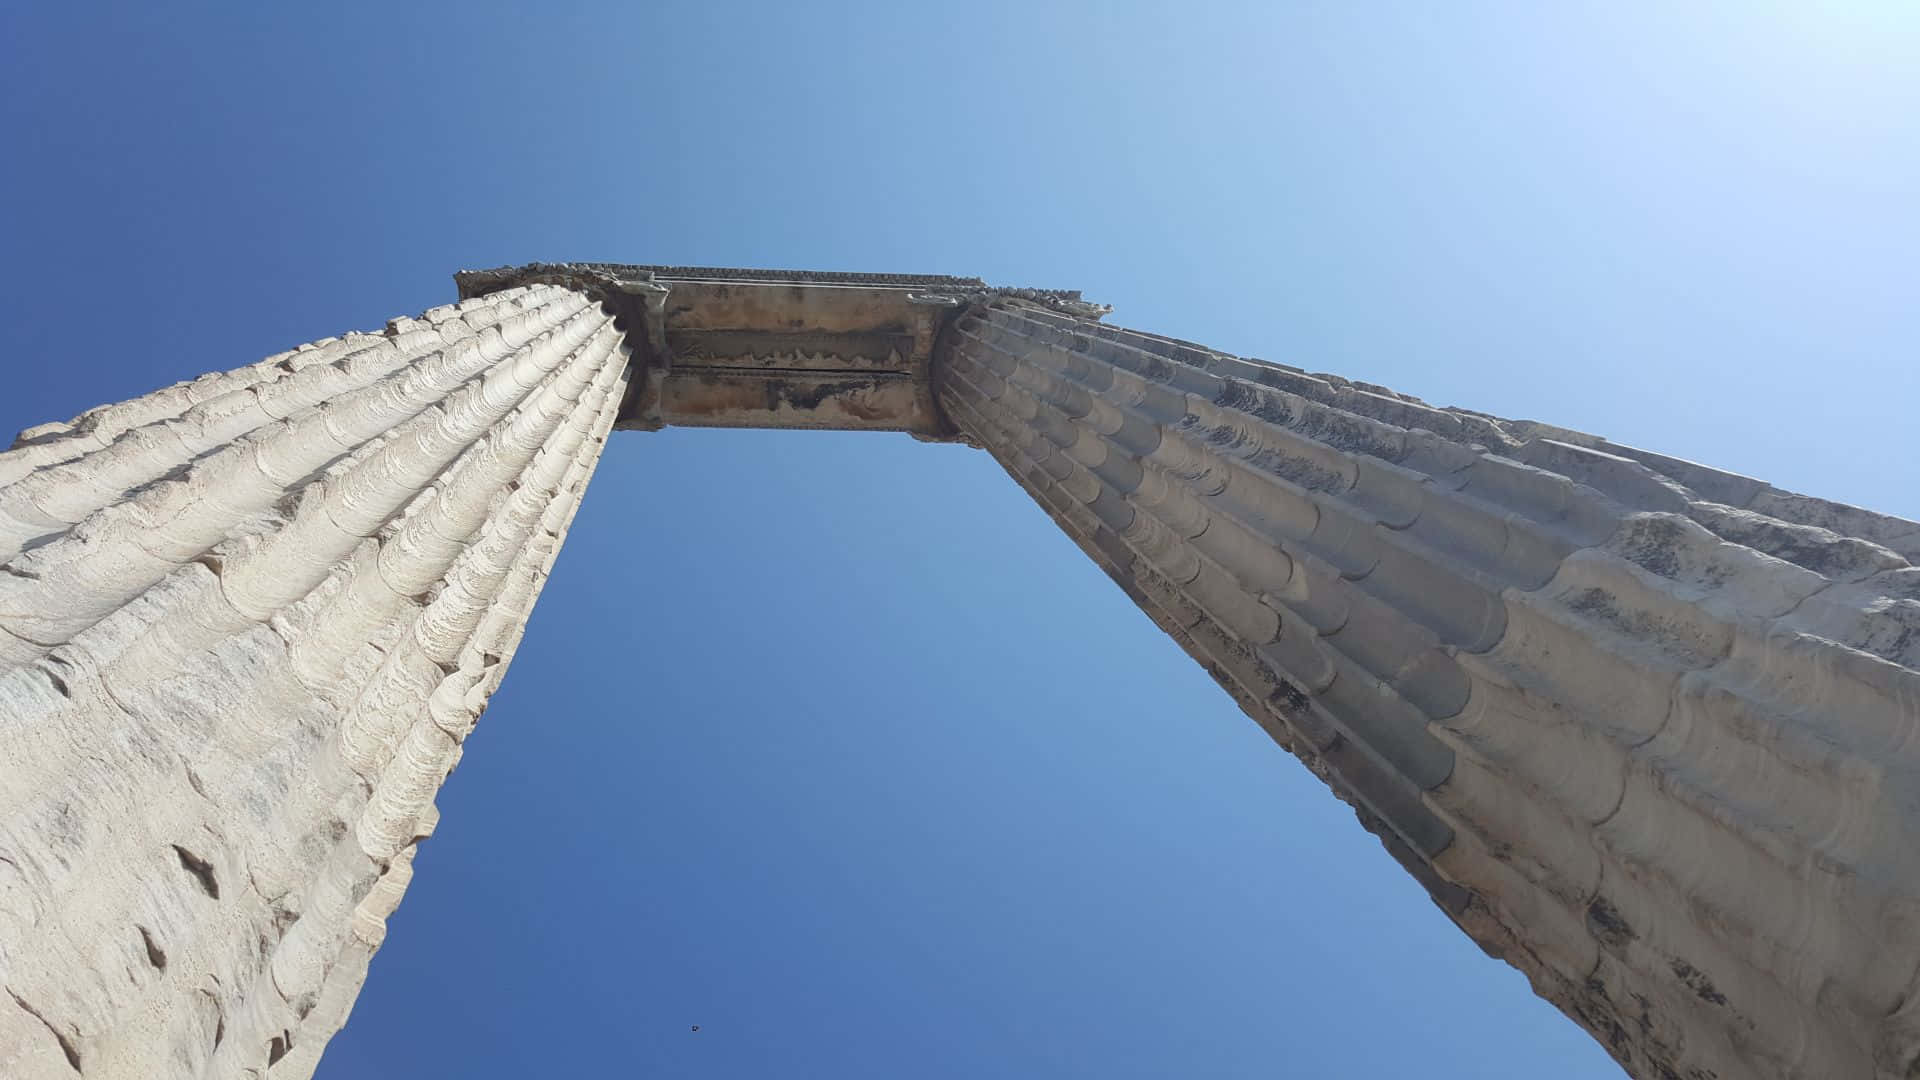 Shot From The Ground Of The Temple Of Apollo Wallpaper